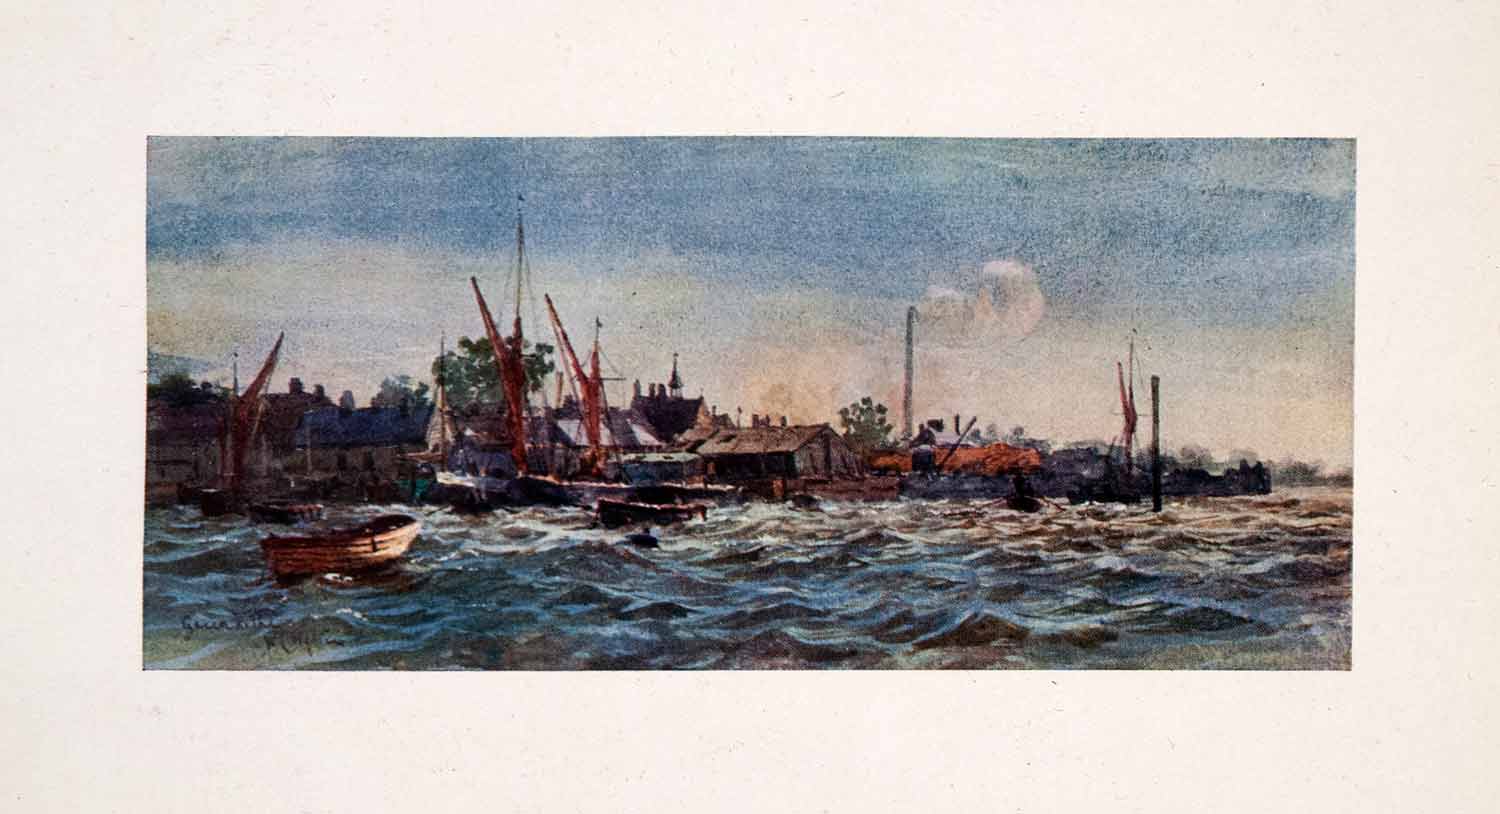 1905 Print Greenhithe Thames River Waves Wharf Boats William Lionel Wyllie Art